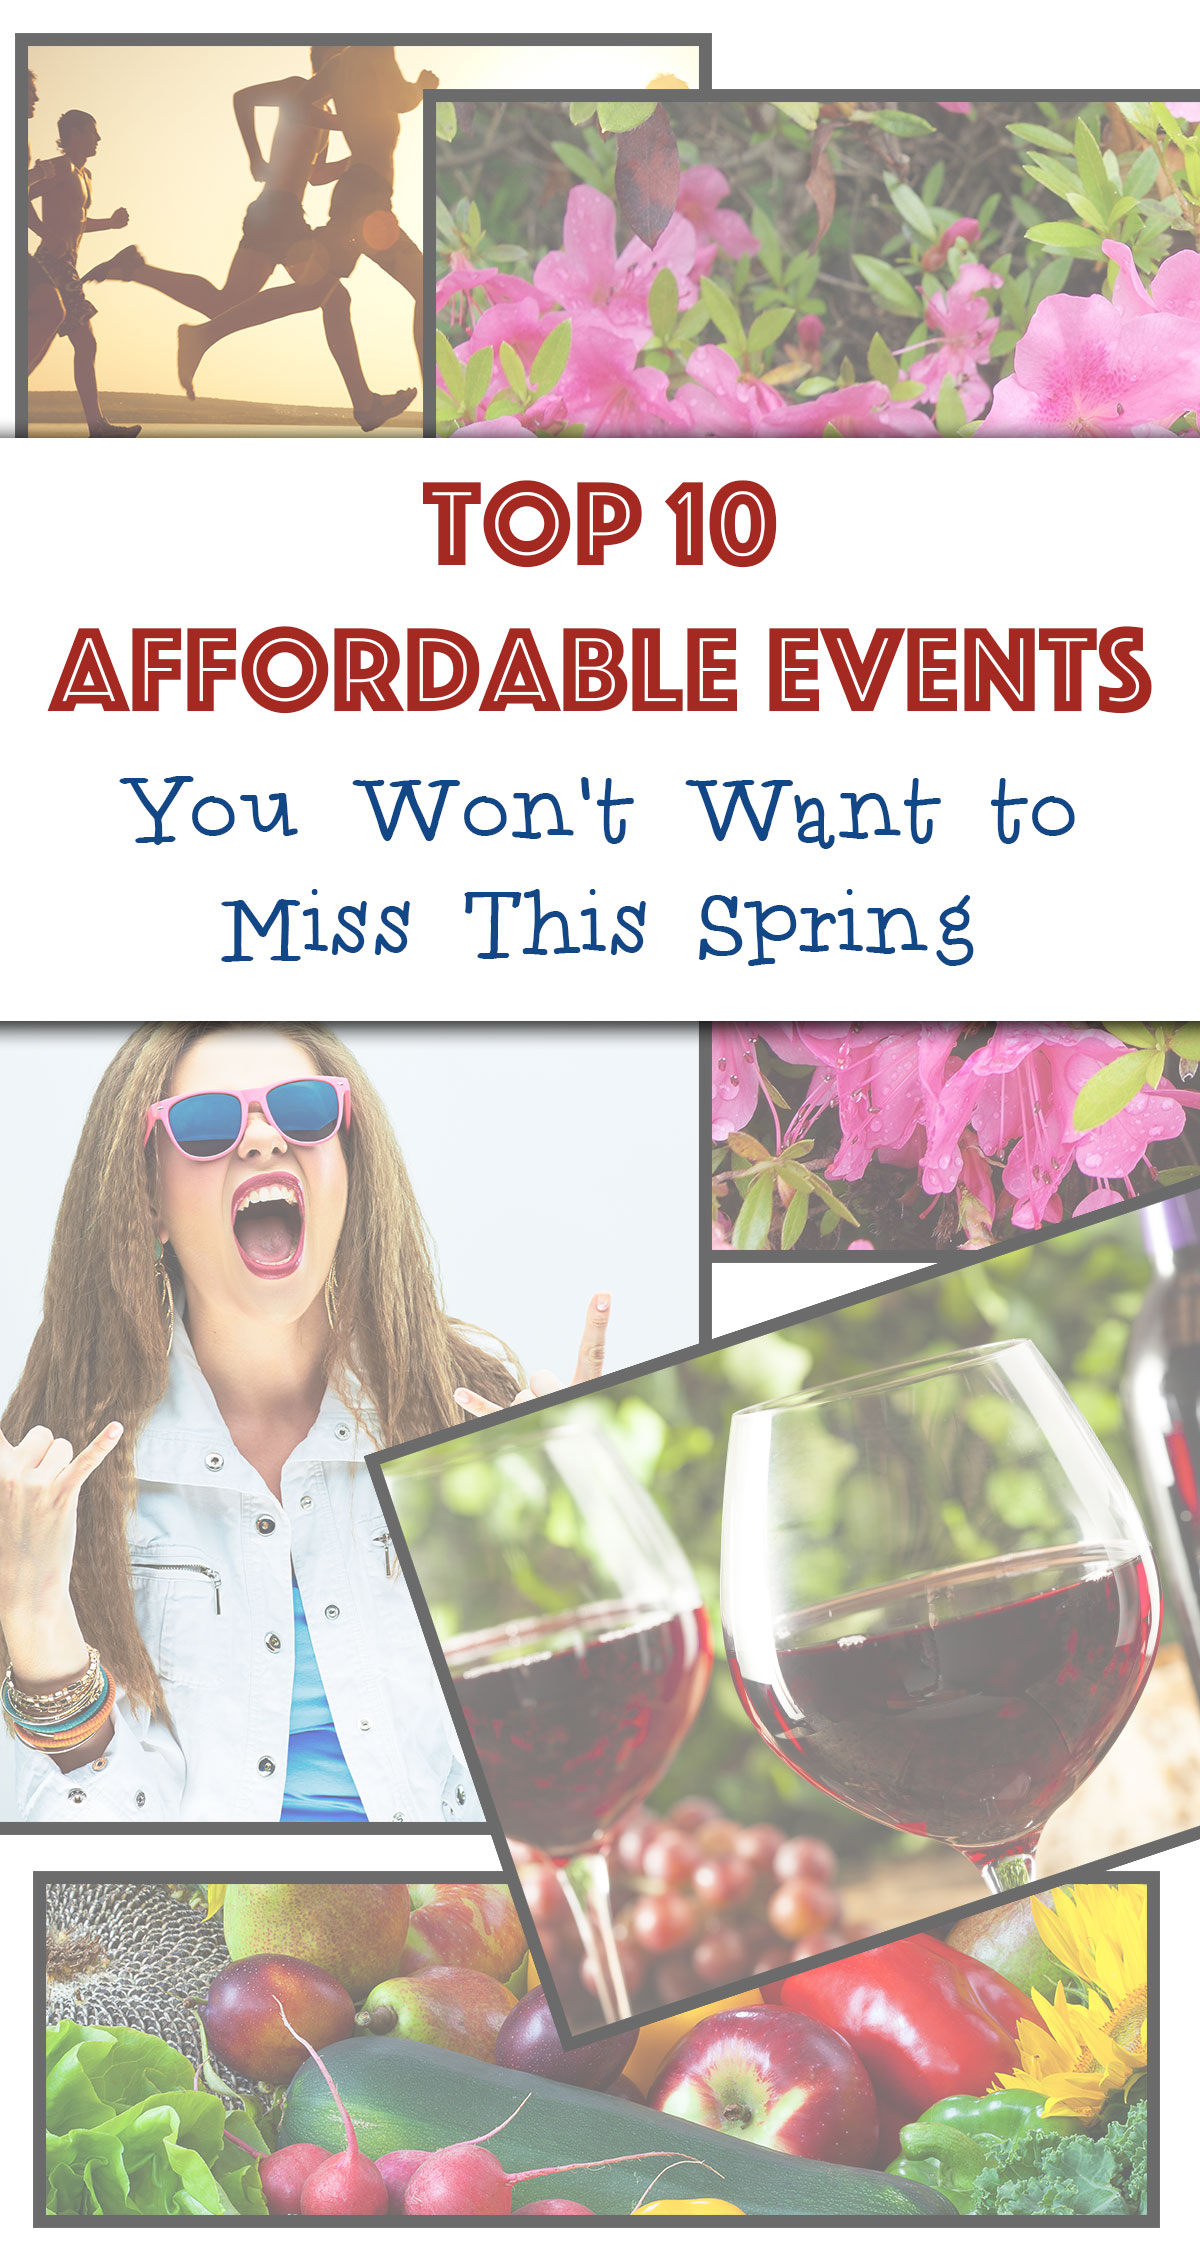 Top 10 Affordable Events You Won't Want to Miss This Spring Pin